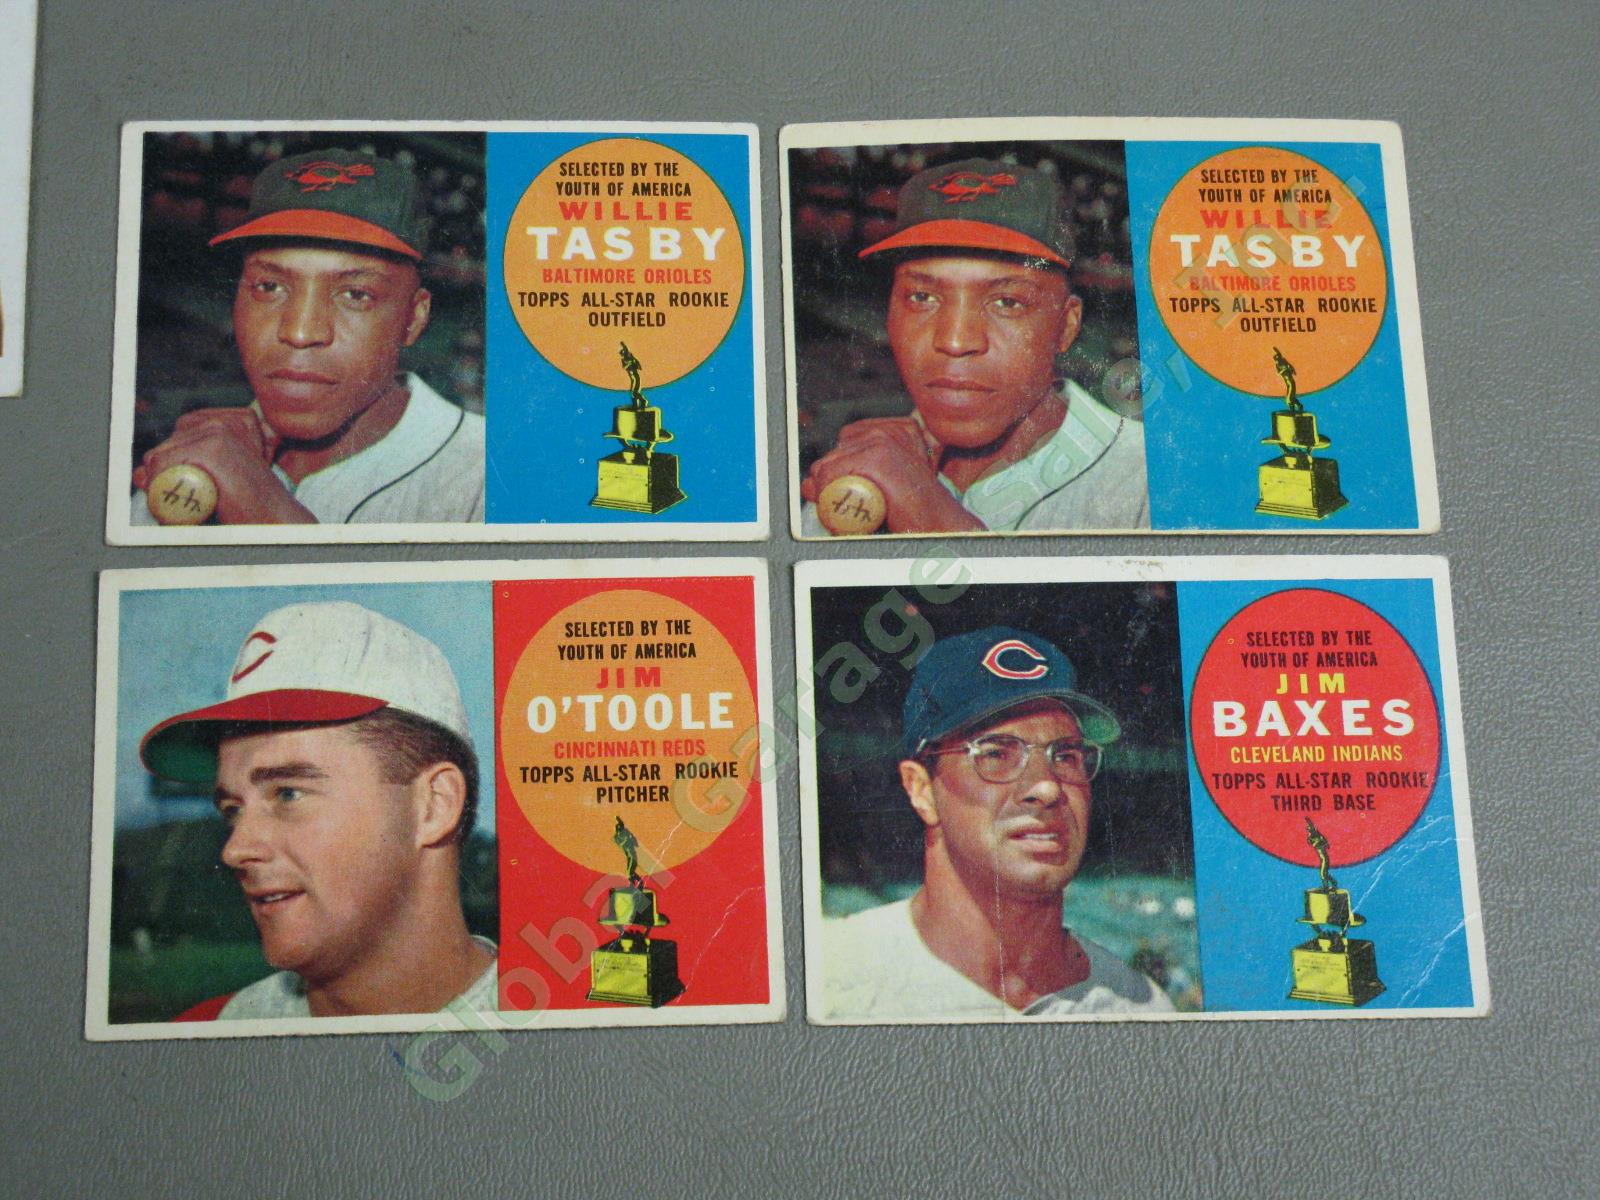 248 Vintage 1960 1960s Topps Baseball Card Lot Rookie Stars Teams Managers NR! 1